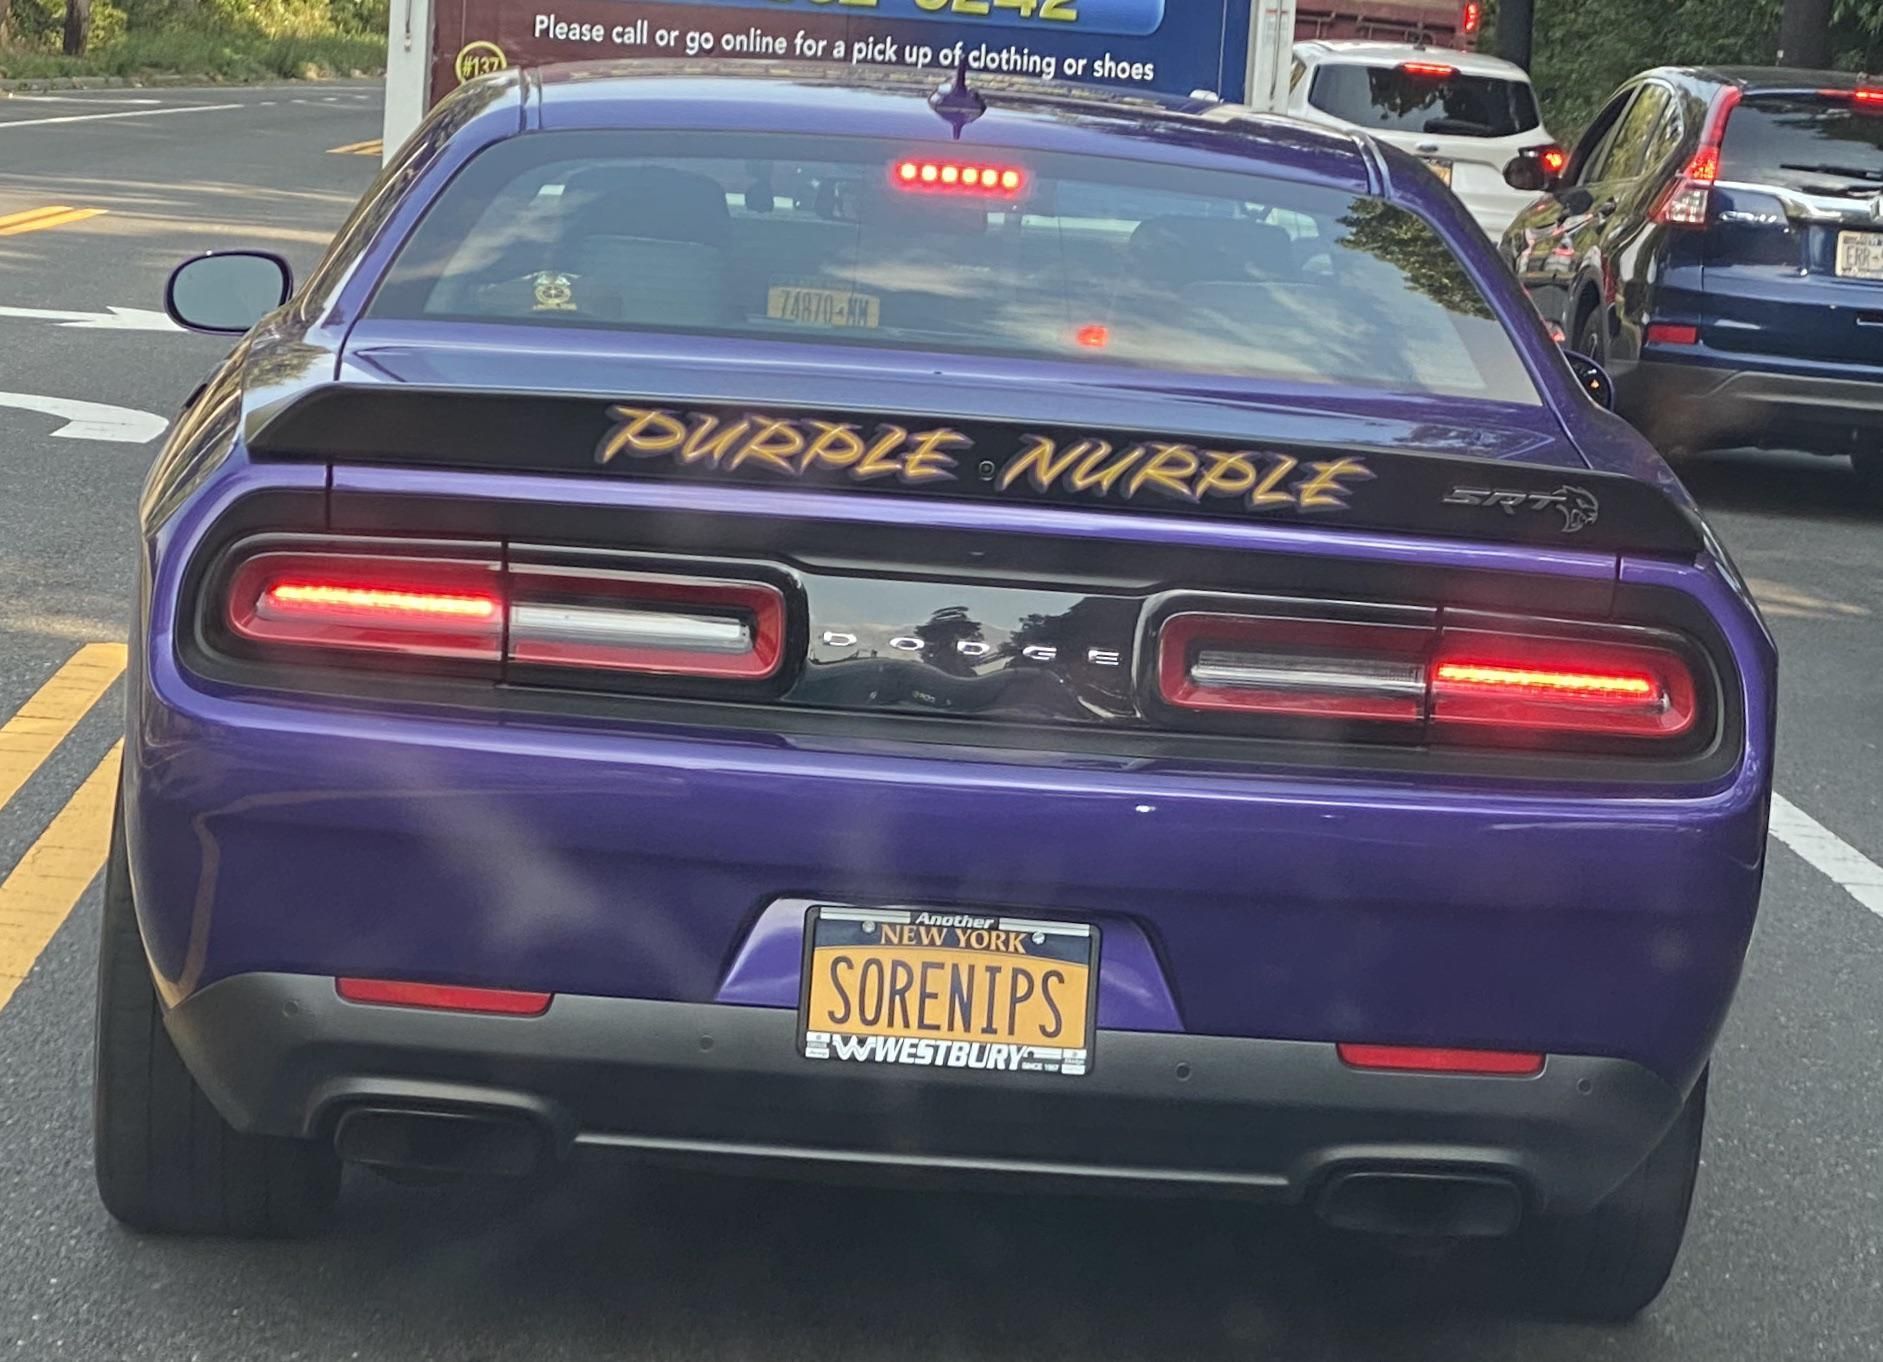 This car I was behind today.